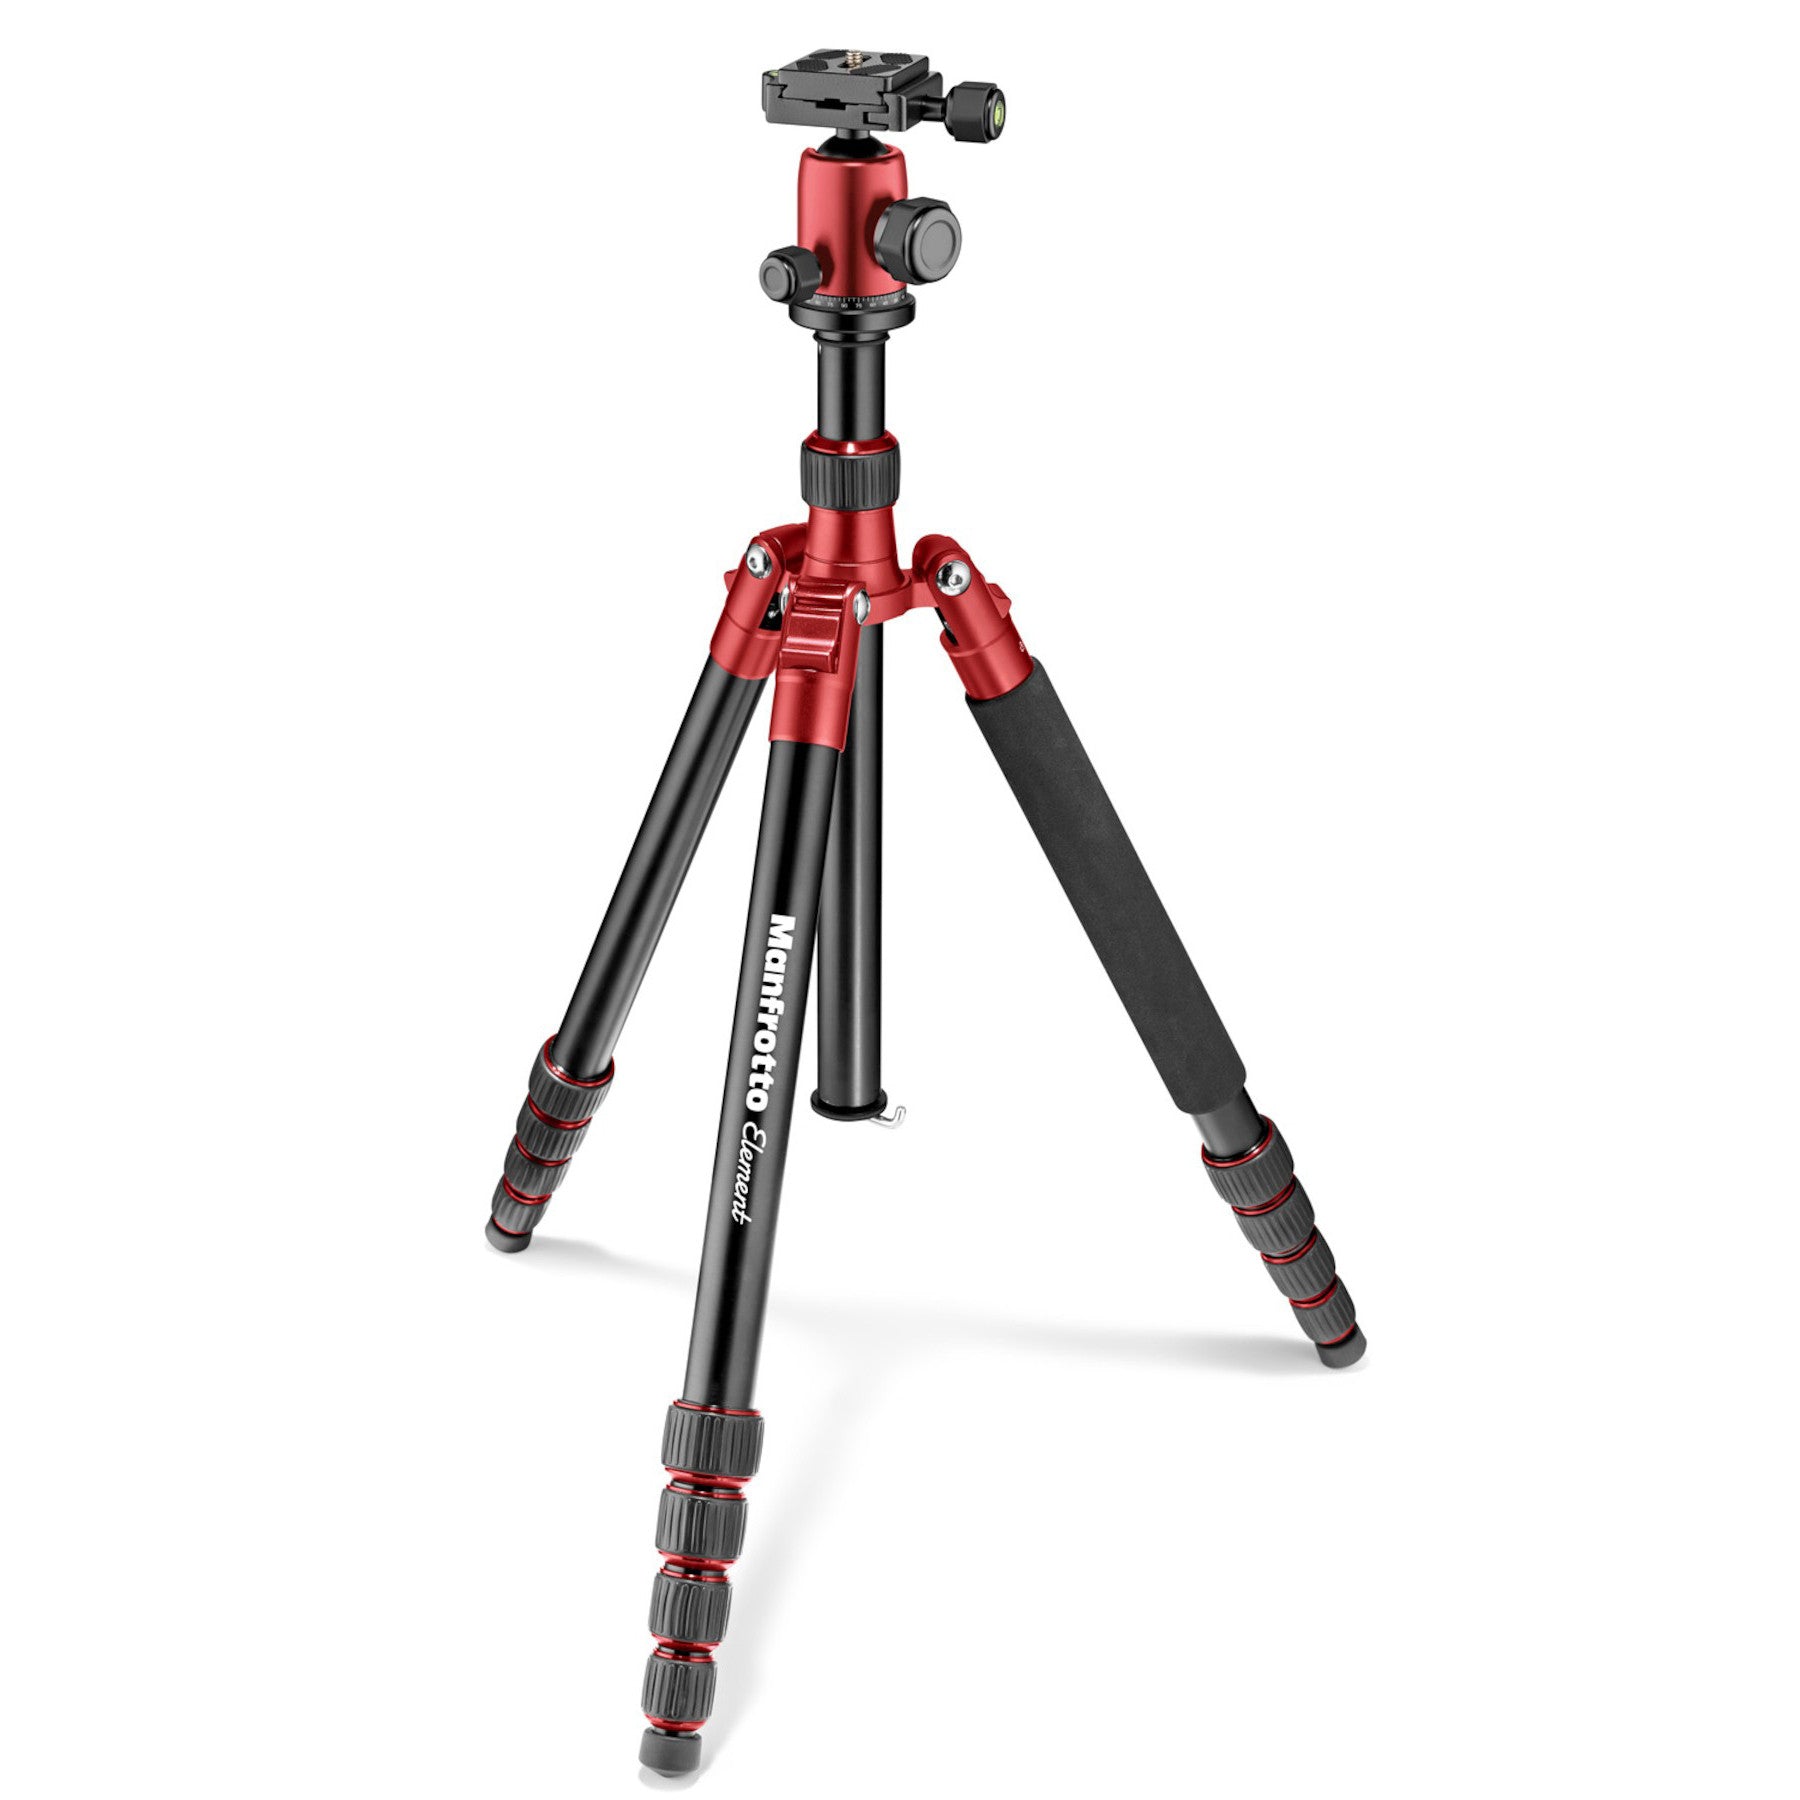 Manfrotto MKELEB5RD-BH Element Big Aluminum Traveler Tripod (Red), tripods travel & compact, Manfrotto - Pictureline  - 1